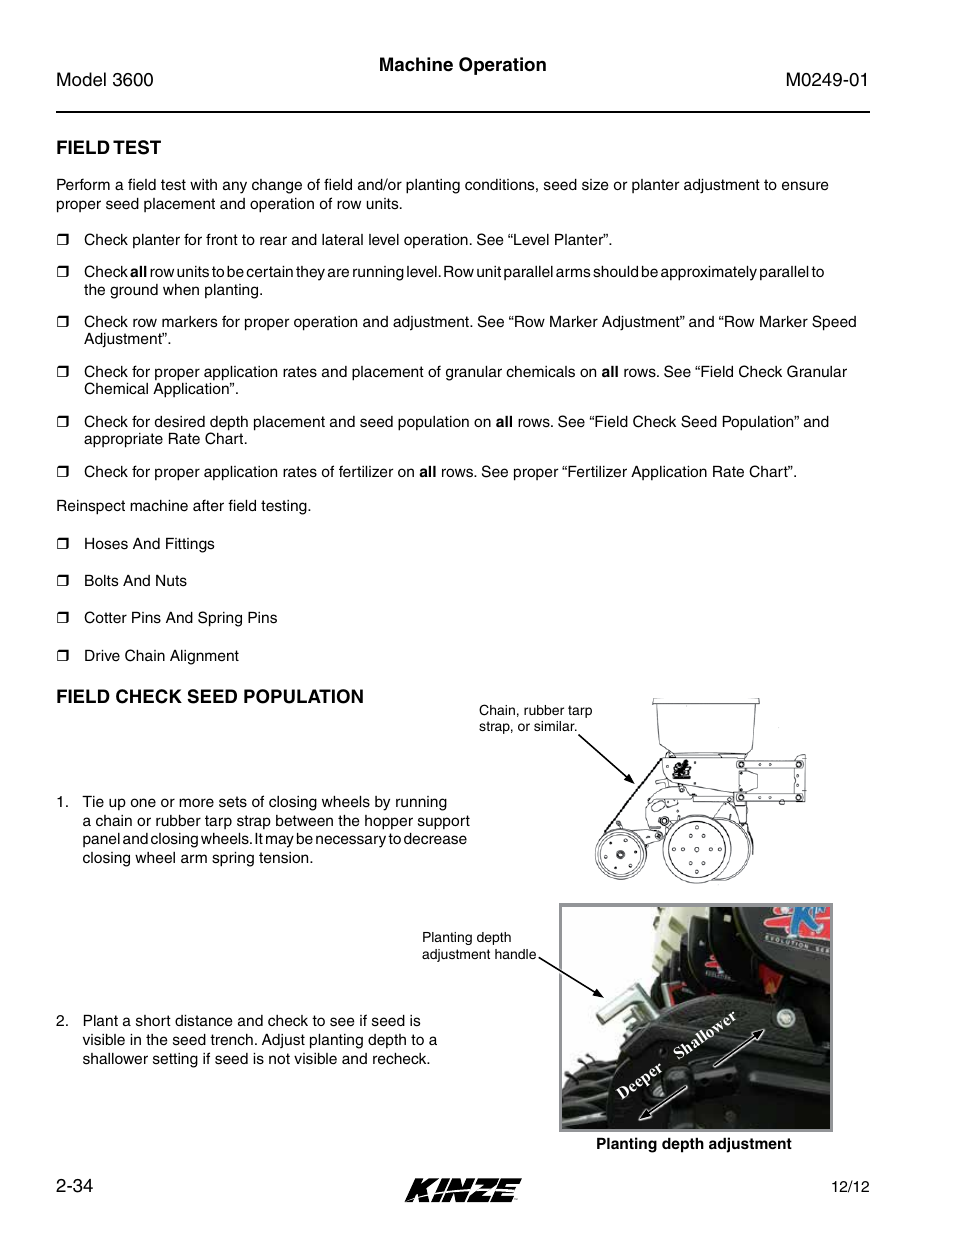 Field test, Field check seed population, Field test -34 | Field check seed population -34 | Kinze 3600 Lift and Rotate Planter (70 CM) Rev. 5/14 User Manual | Page 46 / 158